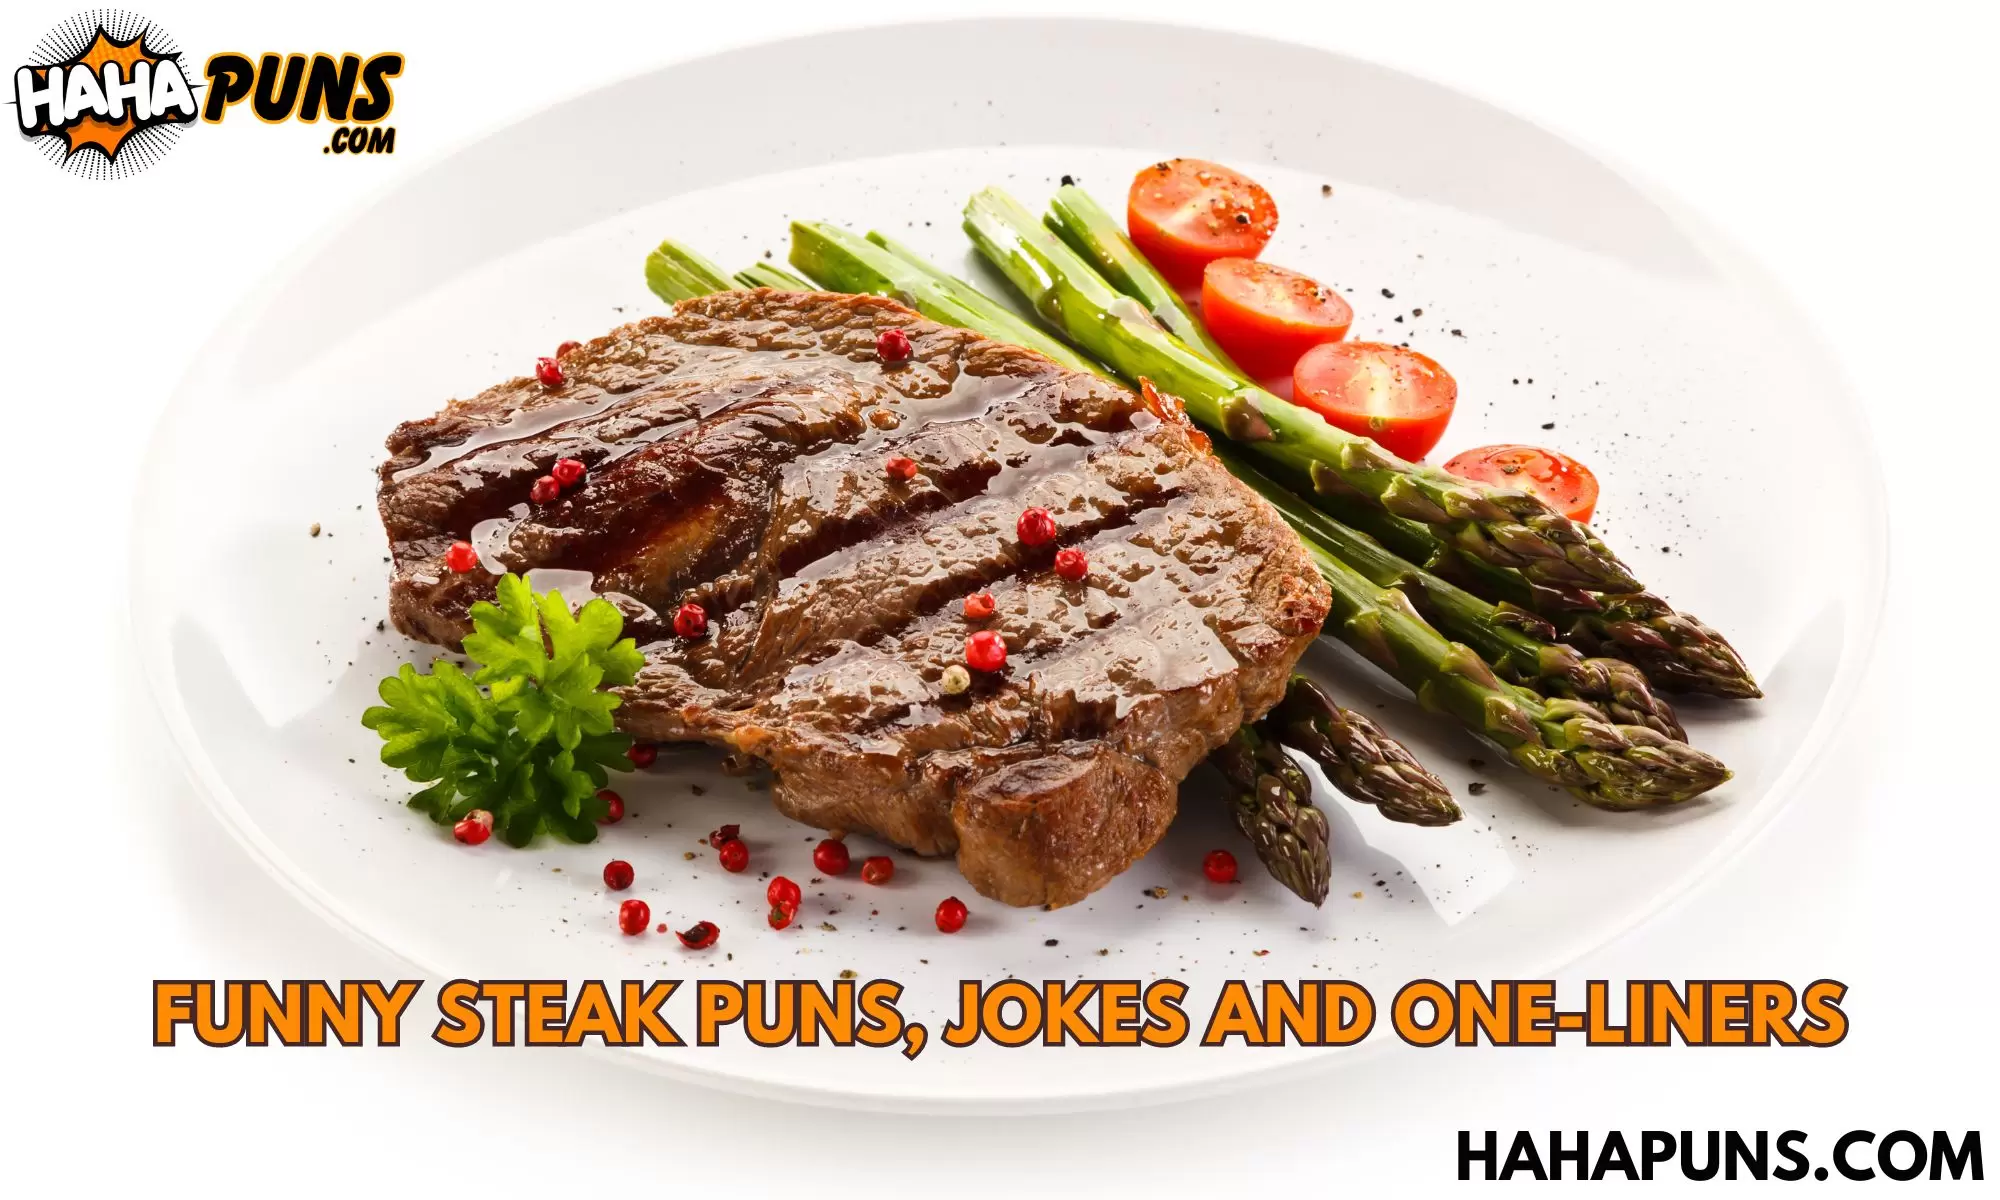 Funny Steak Puns, Jokes And One-Liners